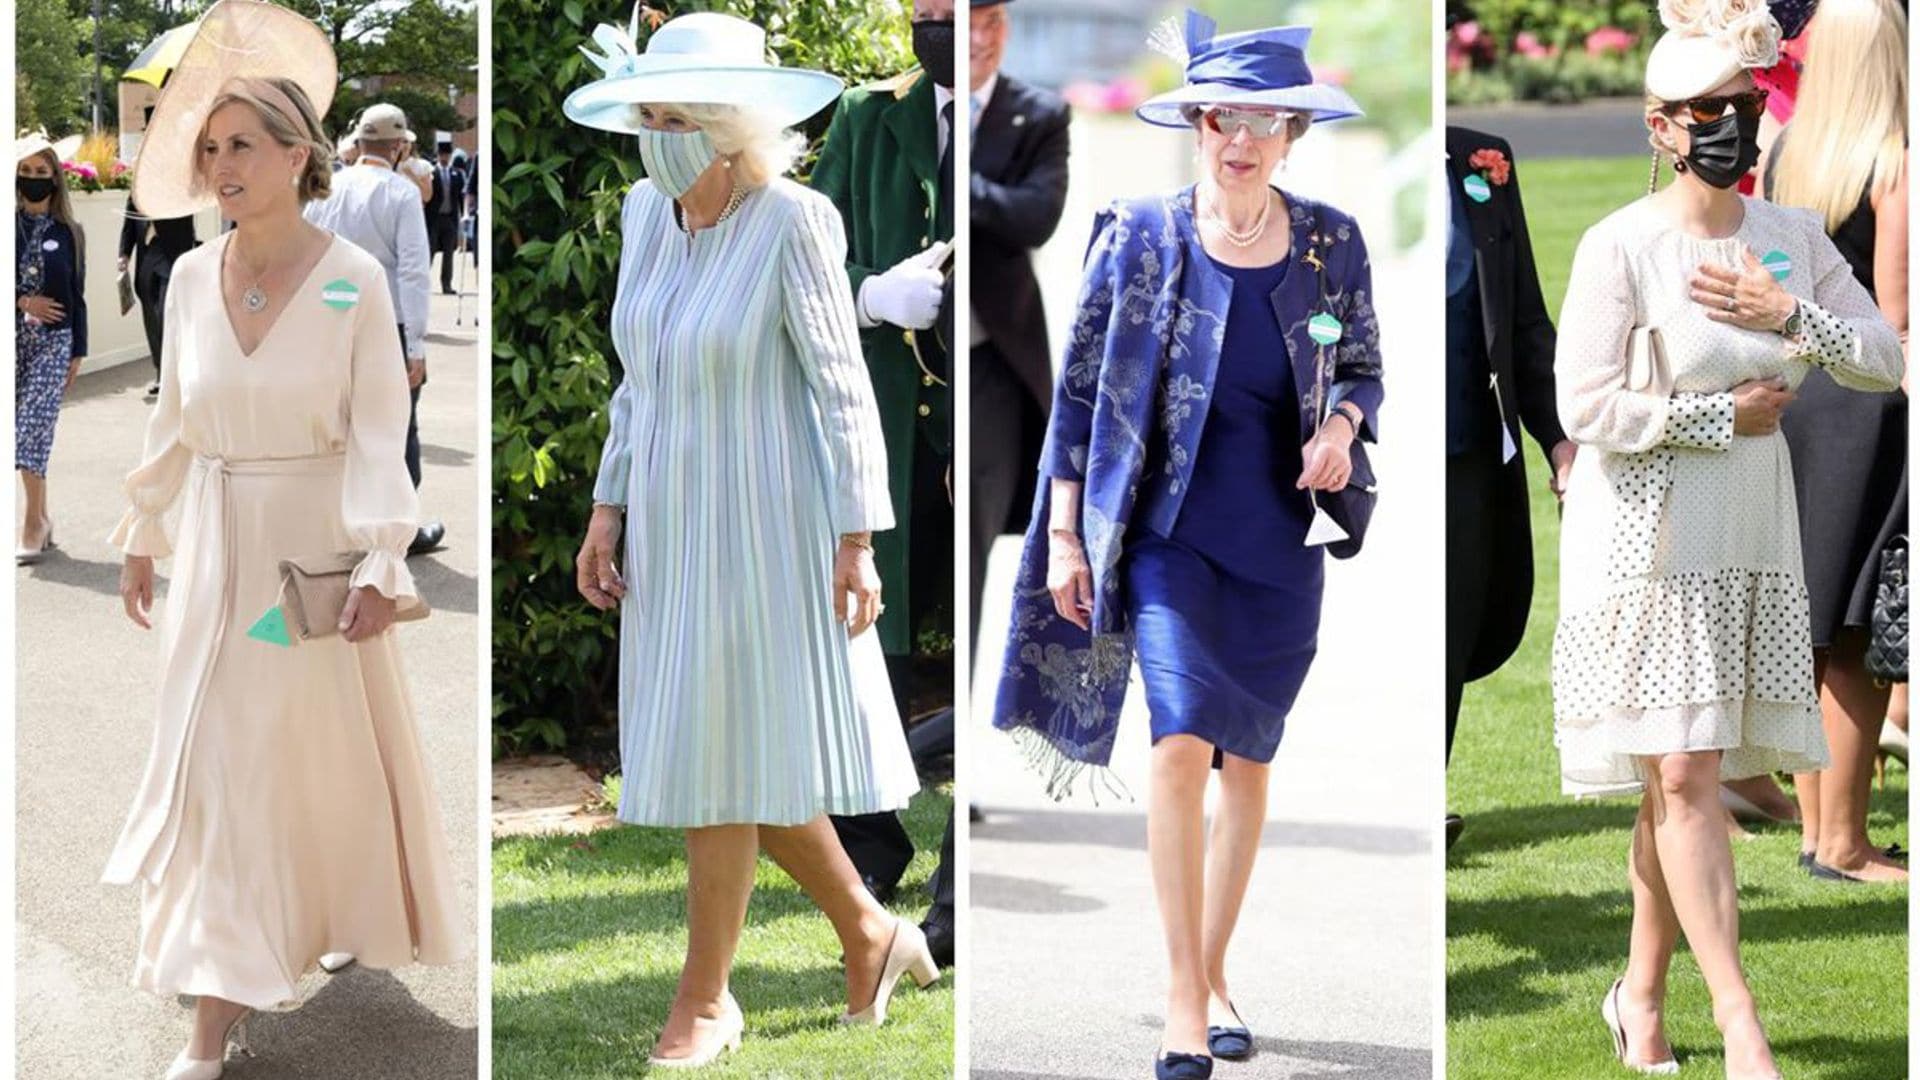 The Royal Ascot is back and its attendees are looking as stunning as ever